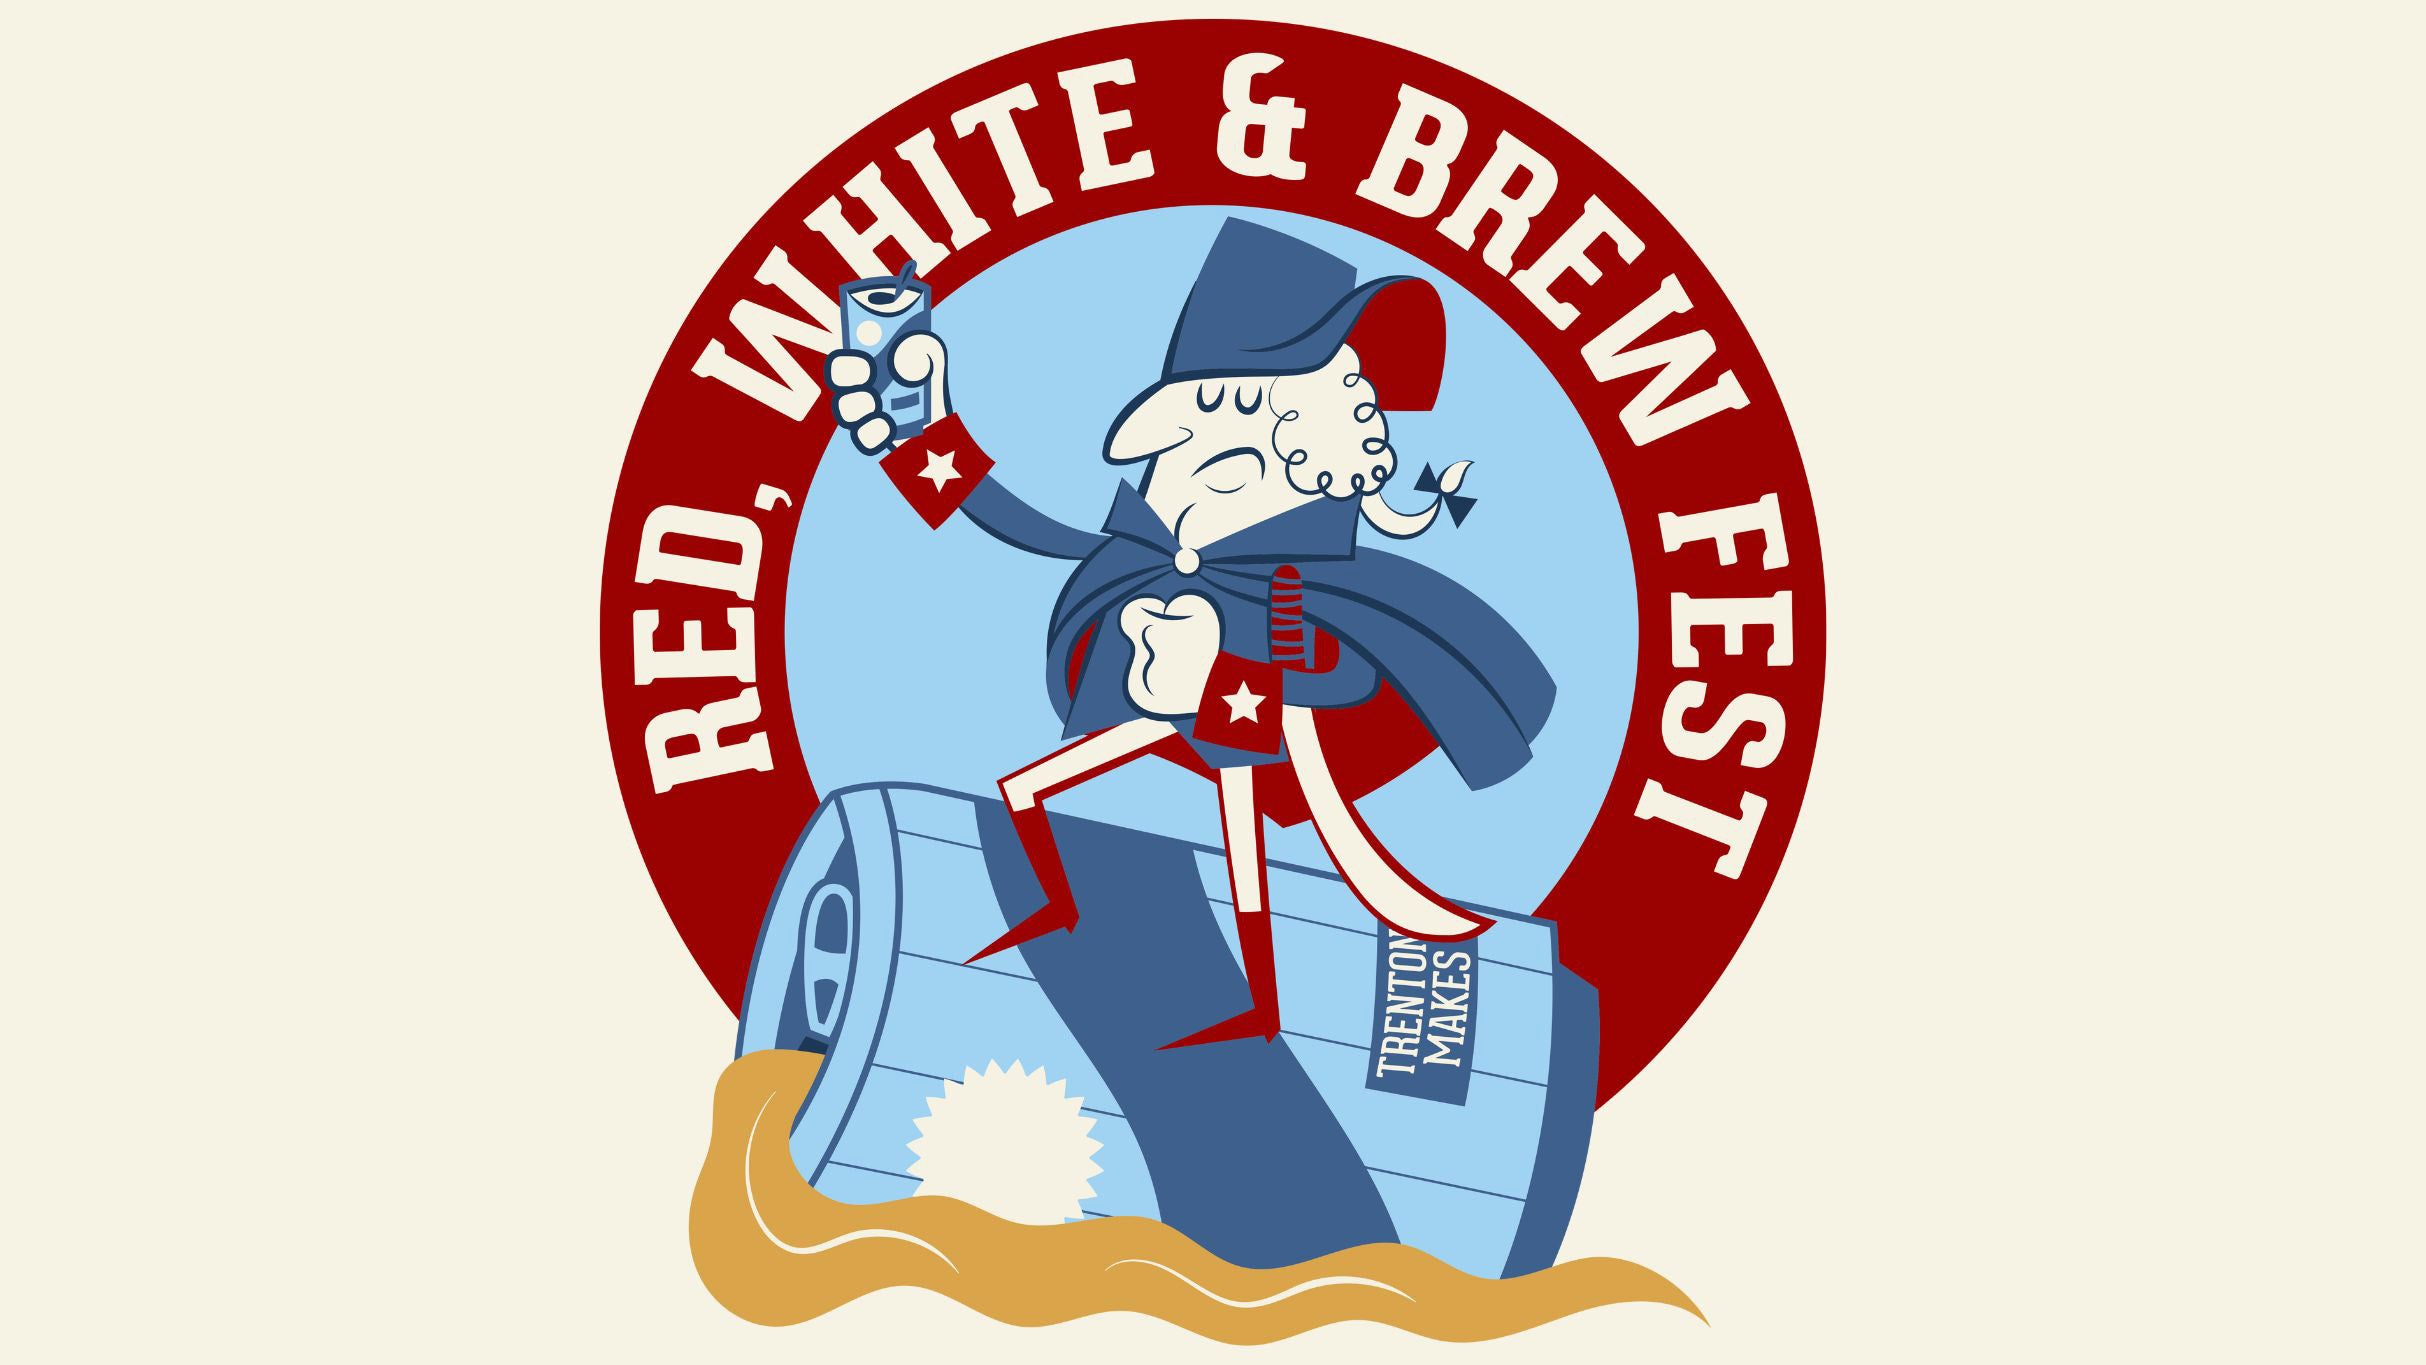 presale password for Red, White & Brew Fest tickets in Trenton - NJ (CURE Insurance Arena)